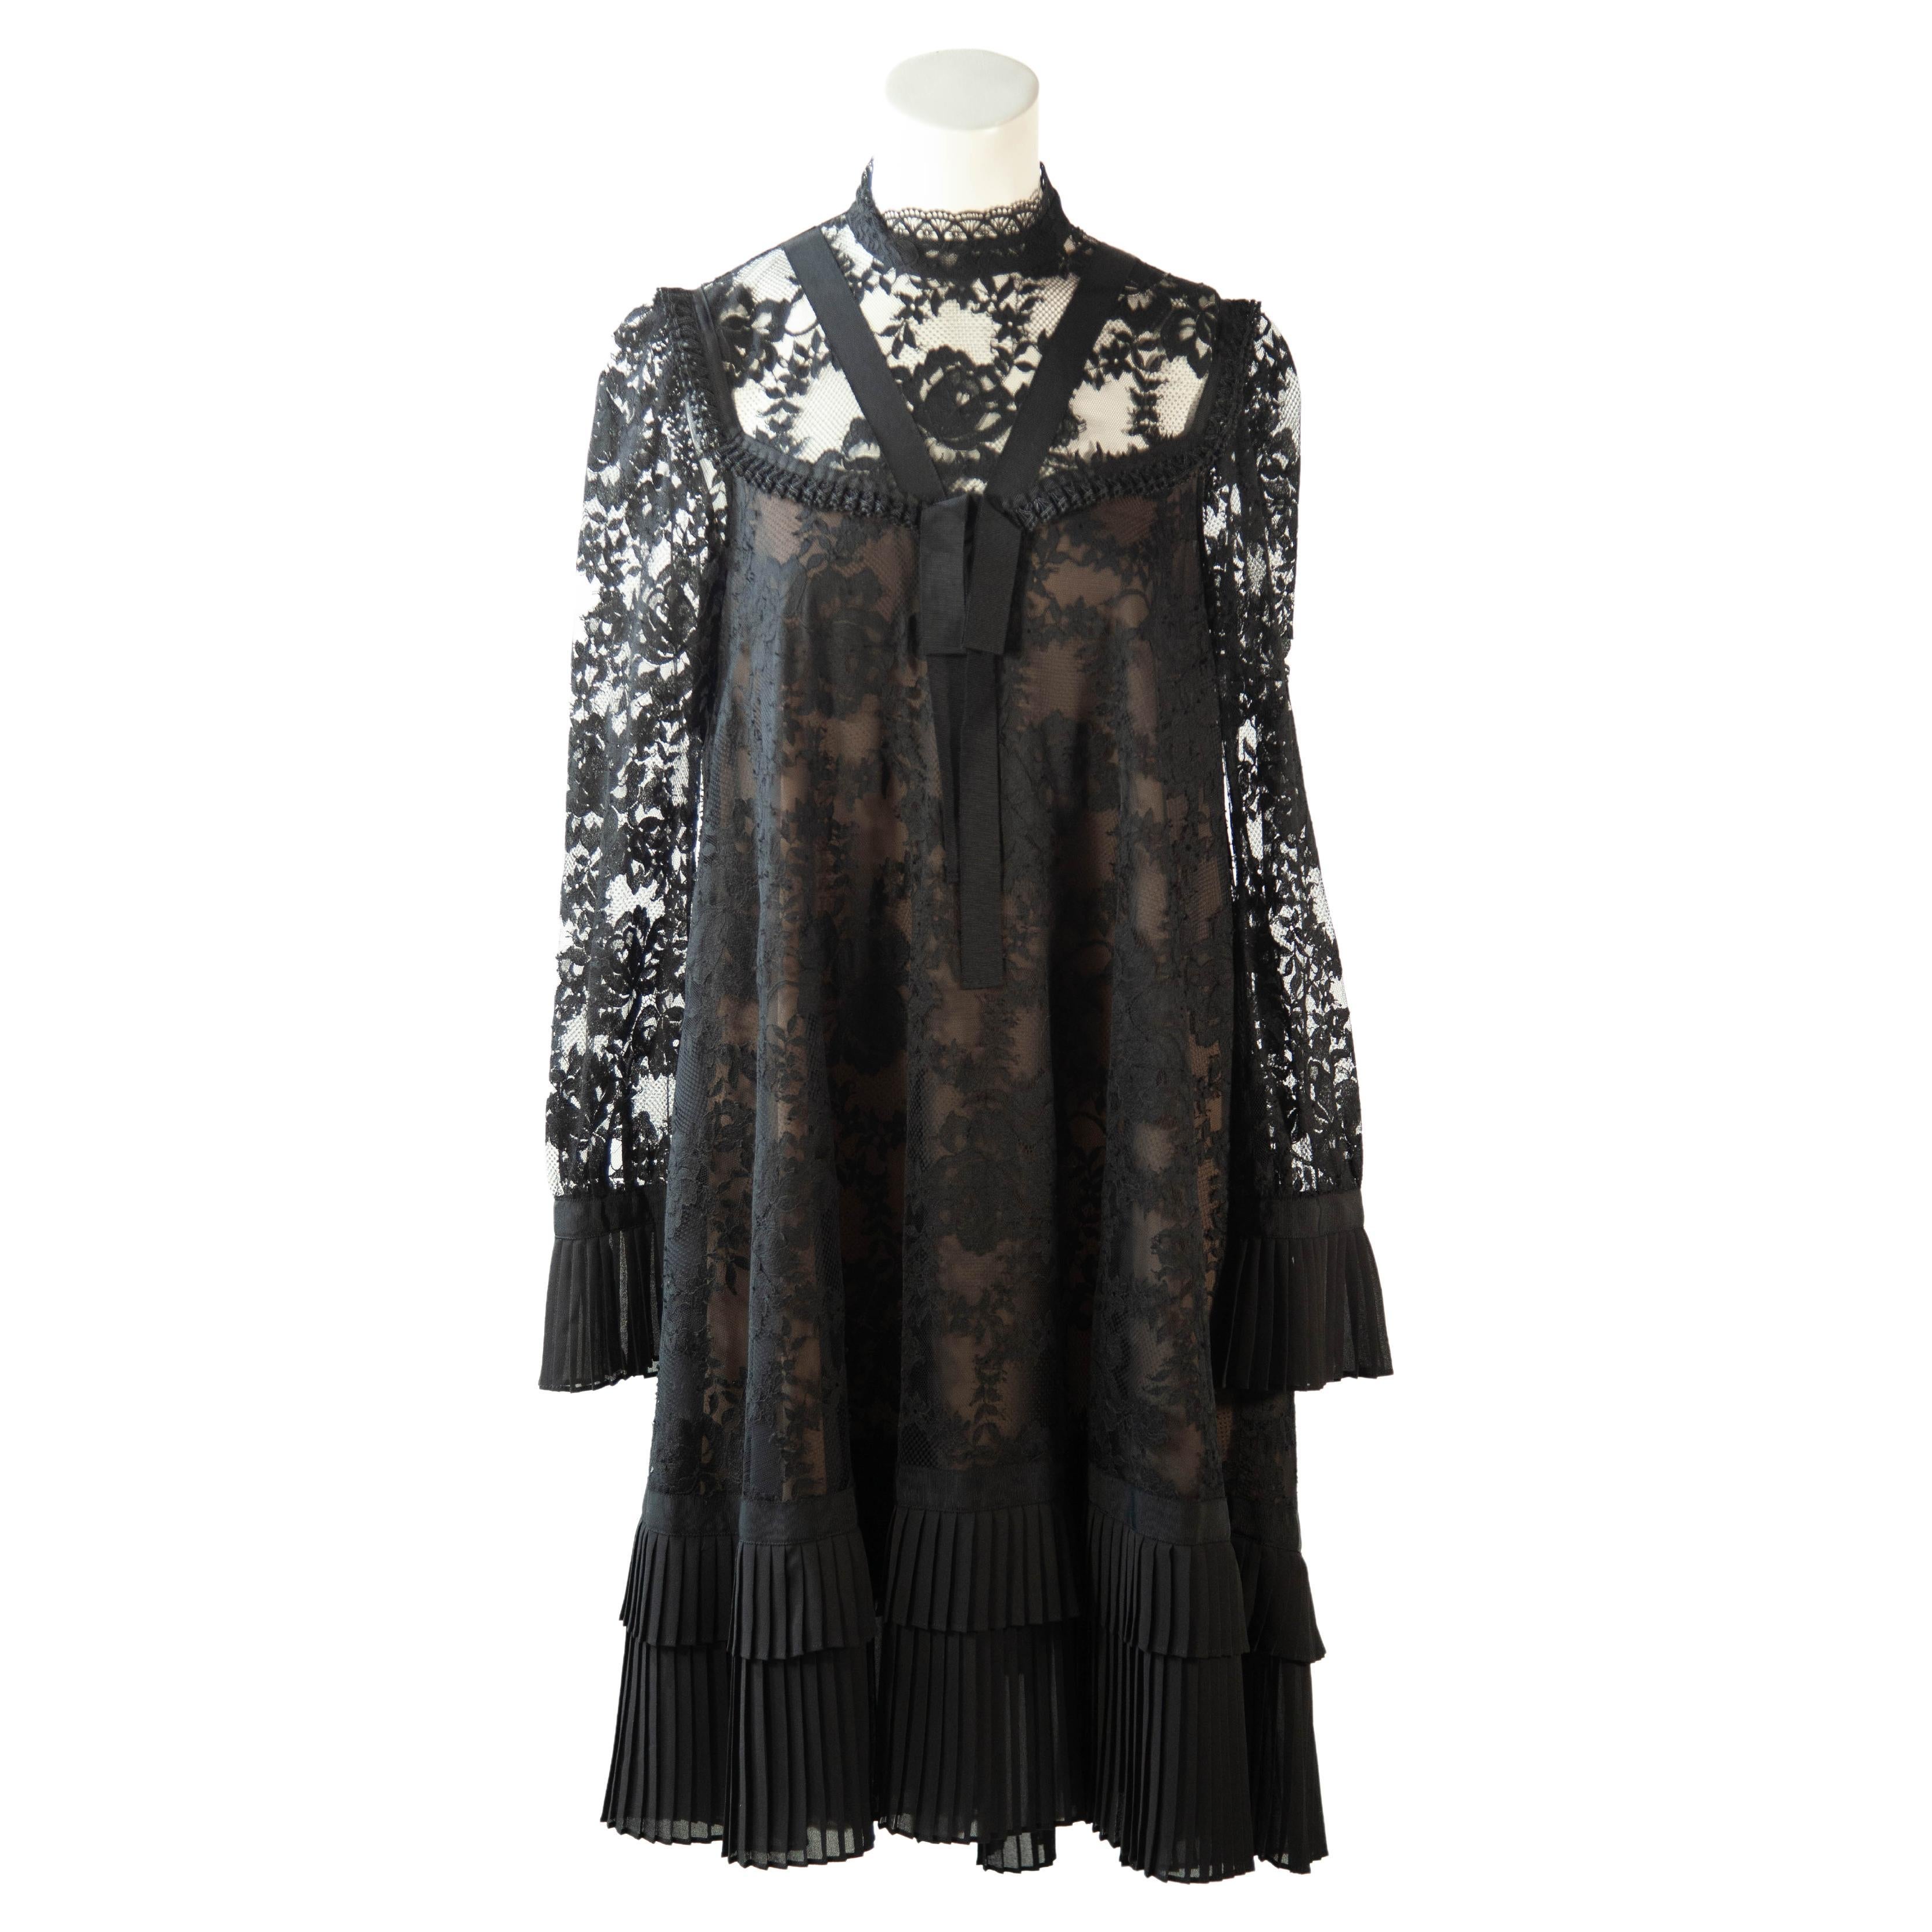 Erdem X H&M, Black, Lace dress with Pleated Cuffs and Hem, 2017 For Sale